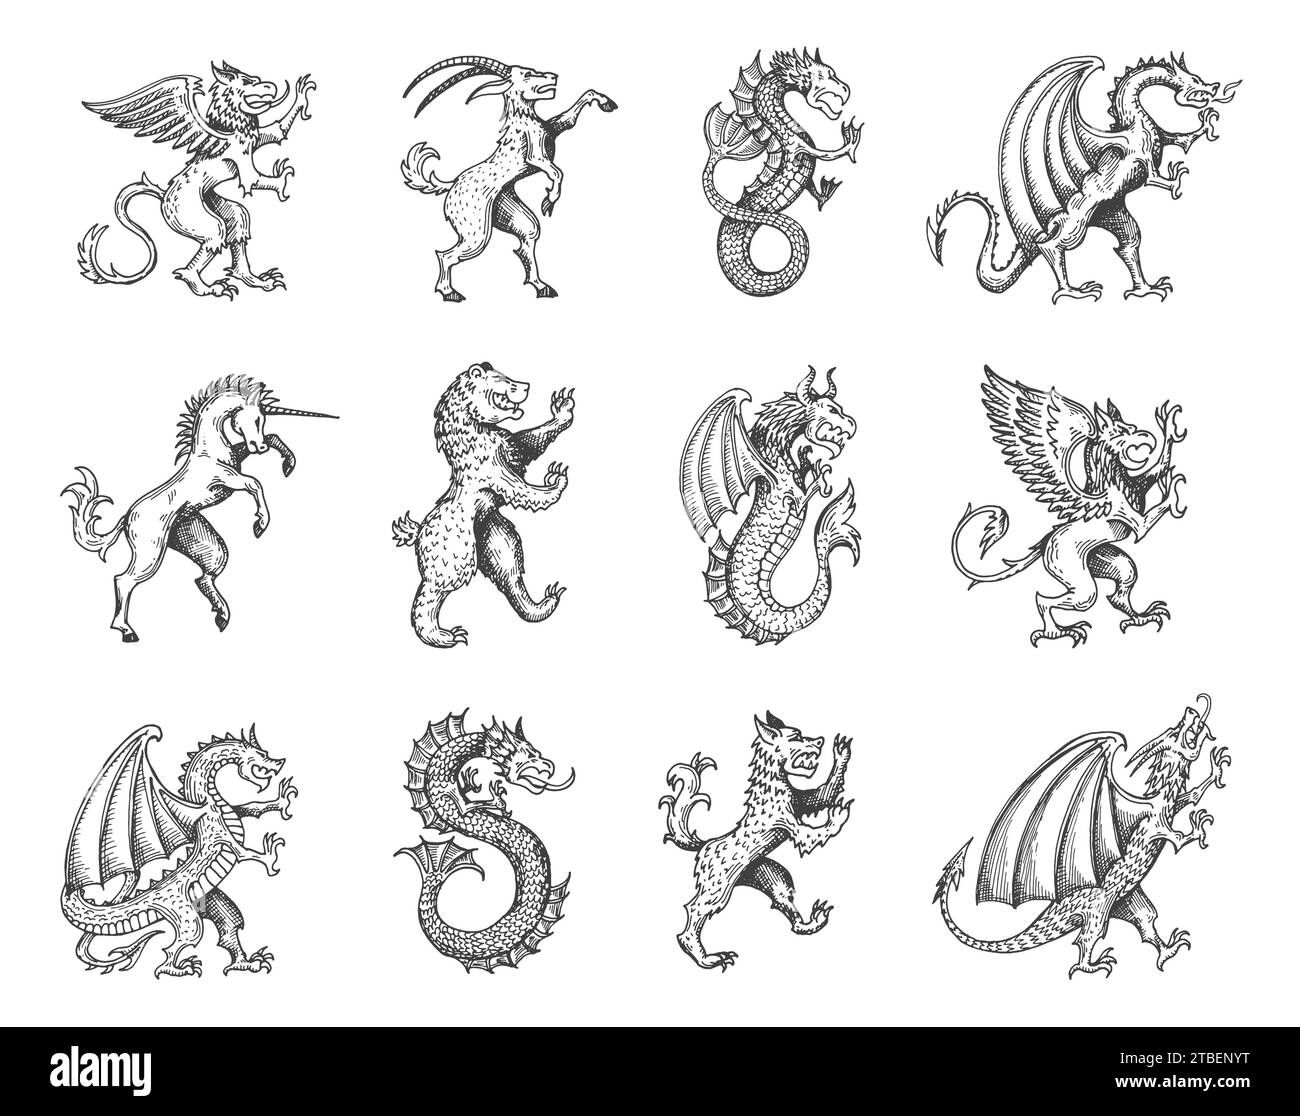 Medieval heraldic animals and monsters, vintage heraldry or tattoo sketch vector creatures. Fantastic mythic animals heraldic icons of eagle griffin, unicorn and dragon, rampant lion, bear and goat Stock Vector